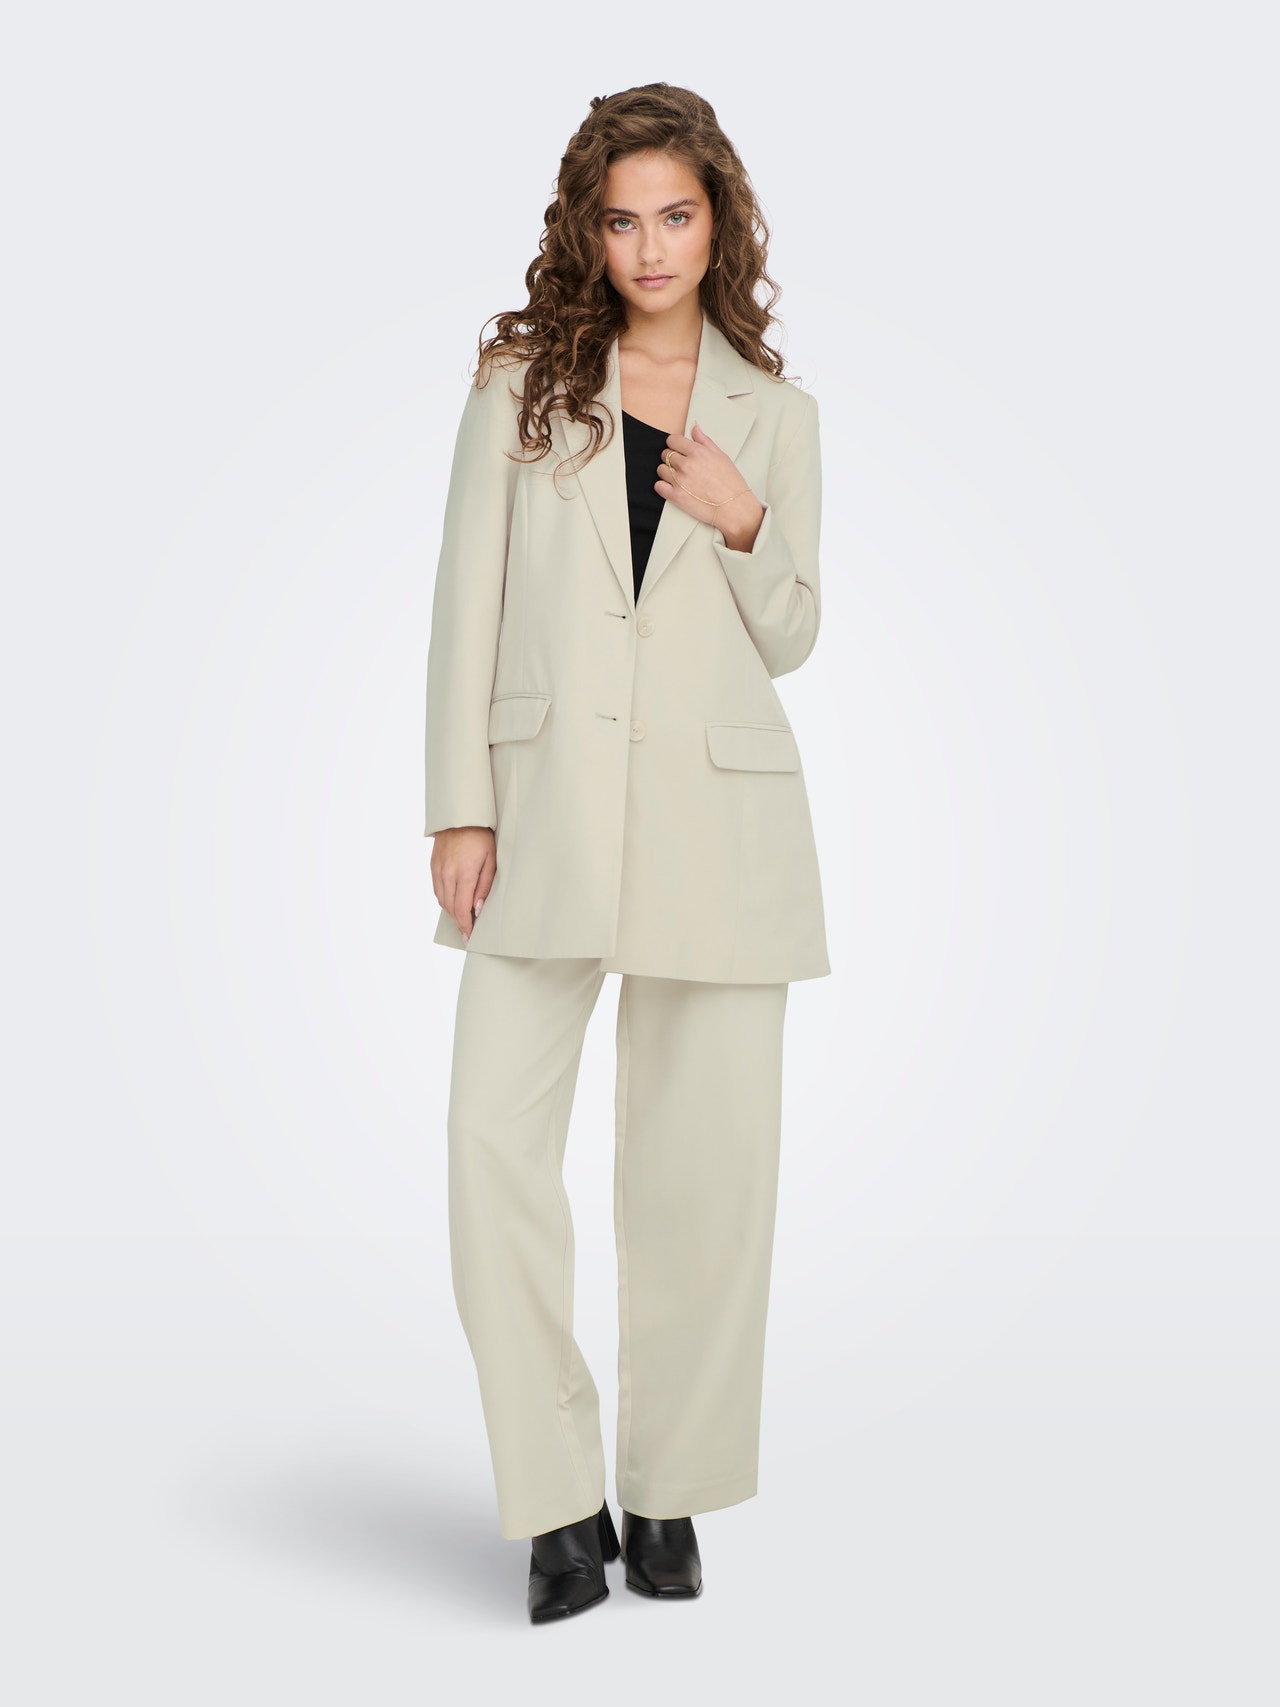 ONLY Blazers Long Line Fit Col à revers -Pumice Stone - 15245203